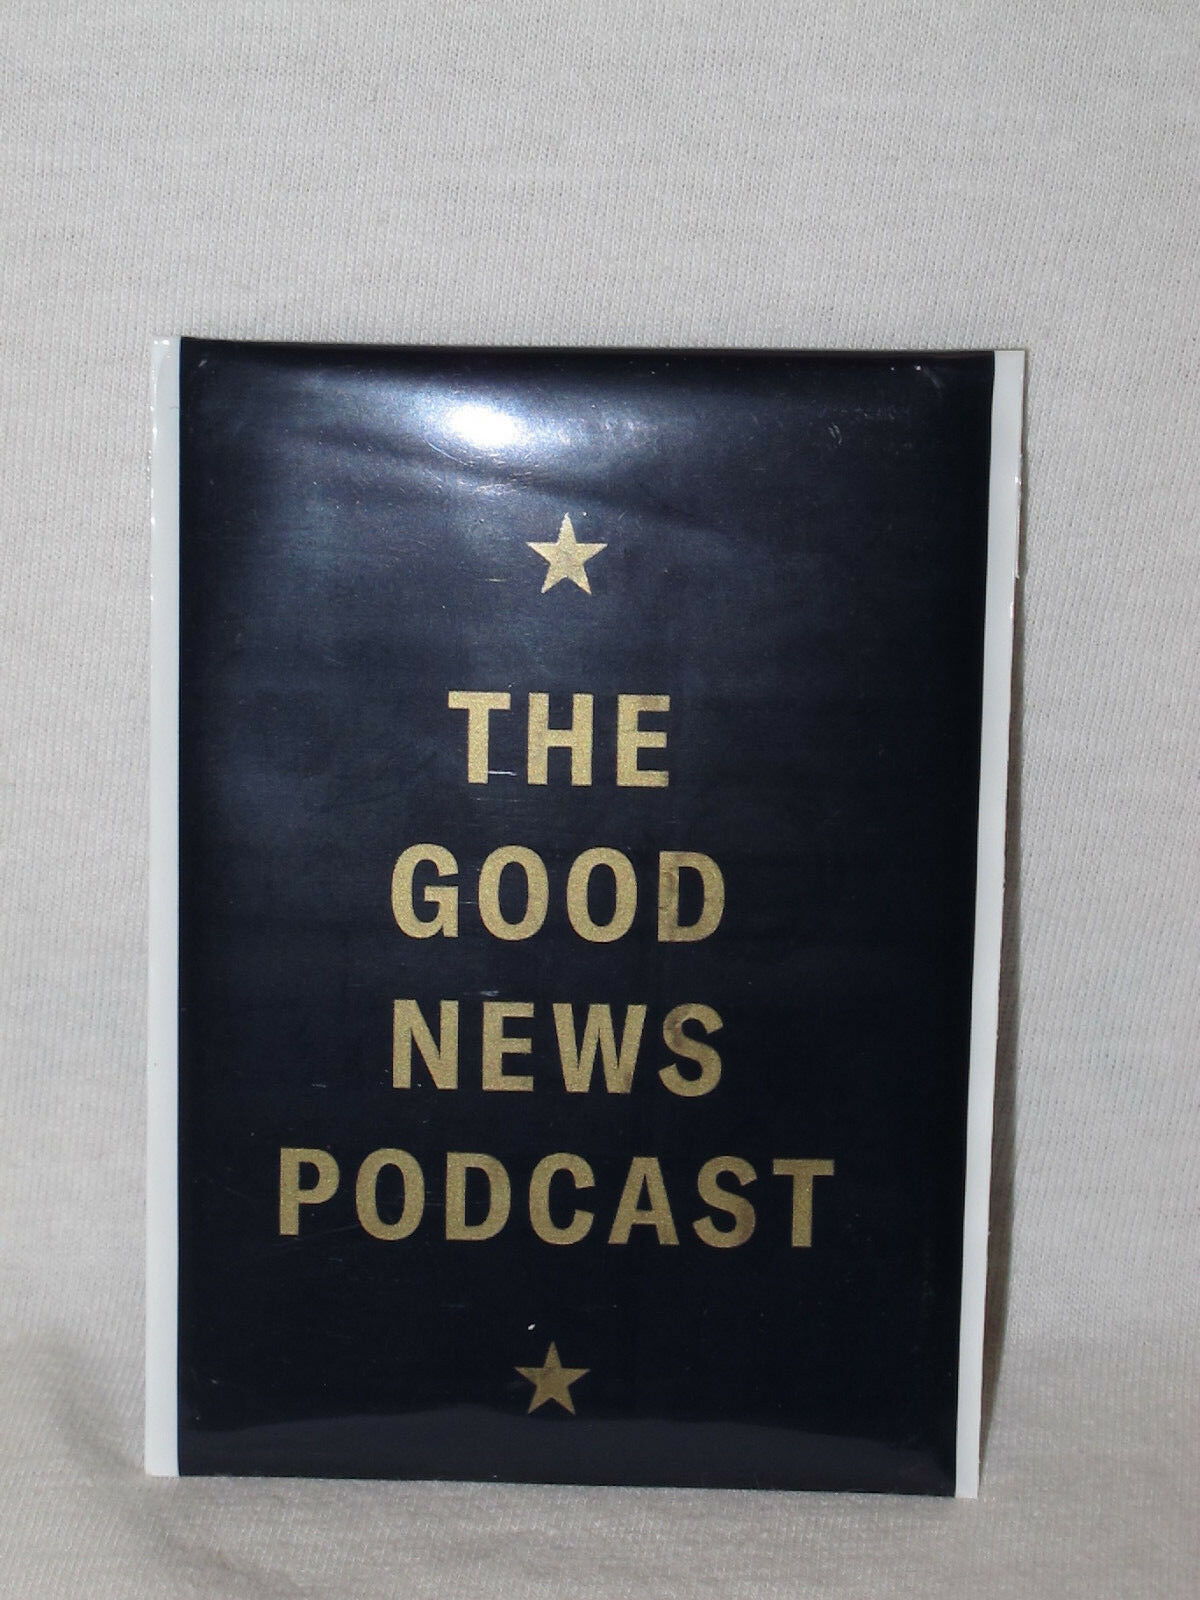 Cards Against Humanity Sealed Saves America The Good News Podcast Expansion Pack - $29.99